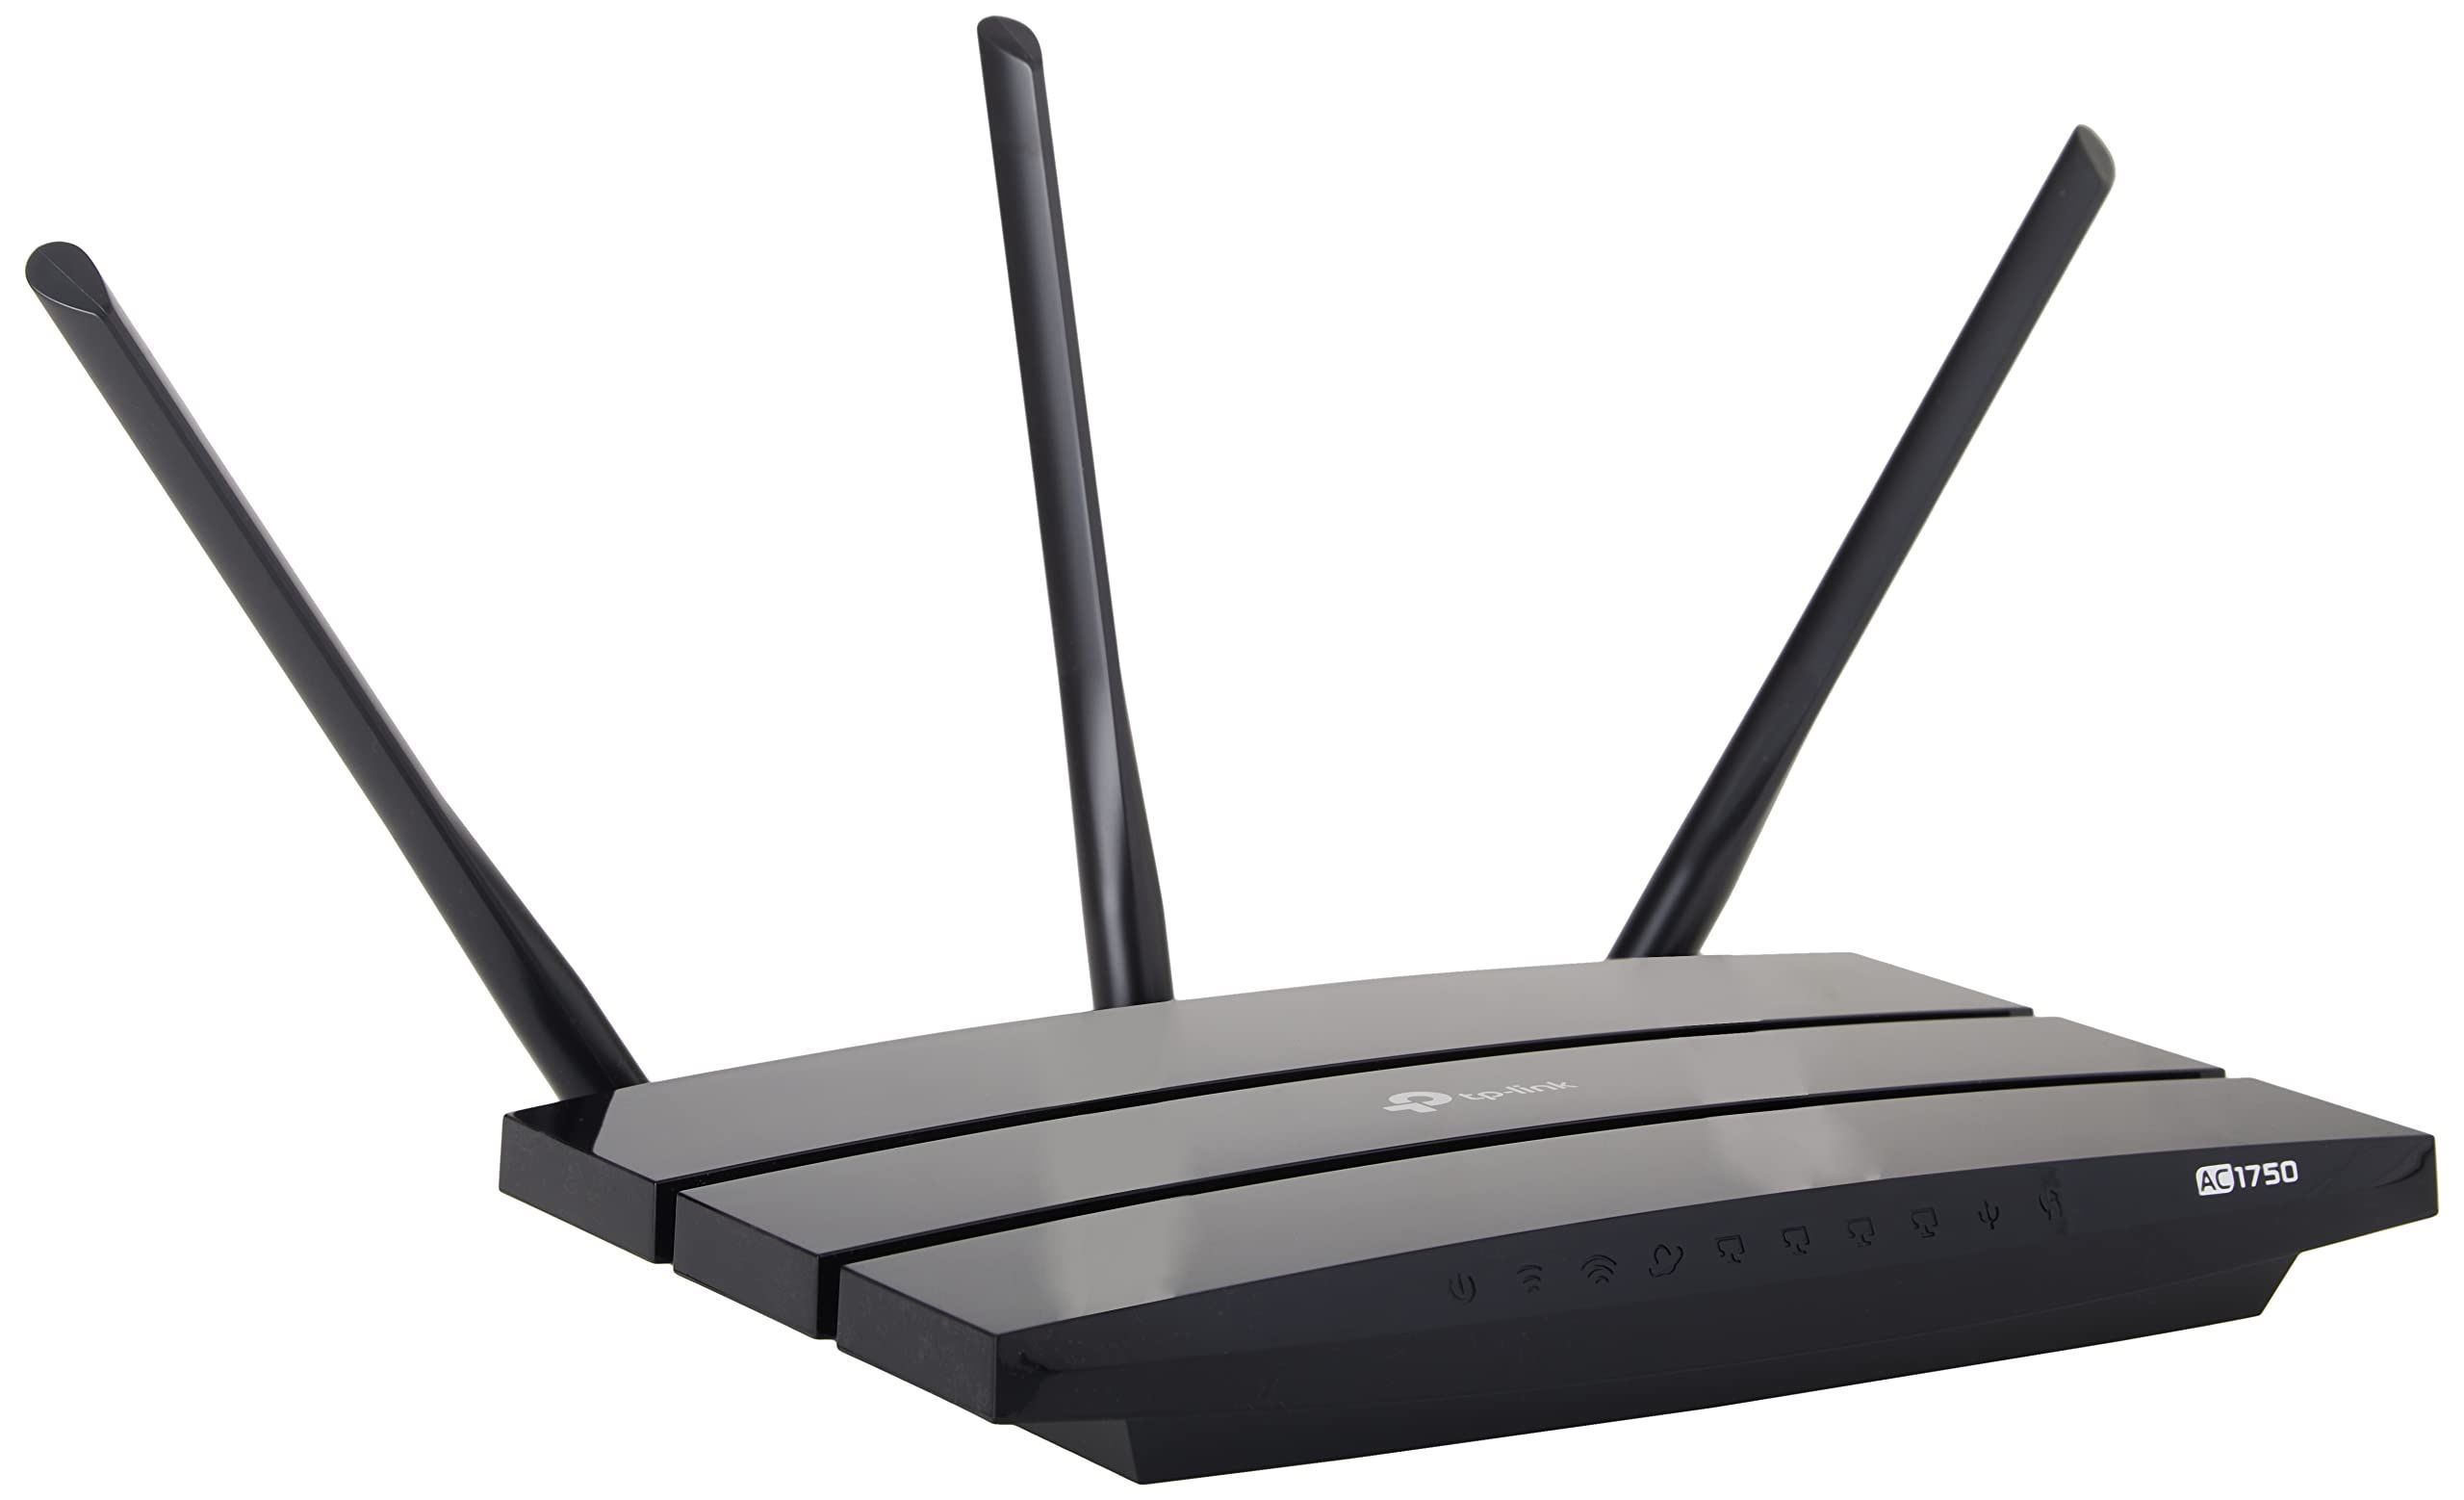 9 Best Tp-Link Archer C7 Ac1750 Wireless Dual Band Gigabit Router for 2023